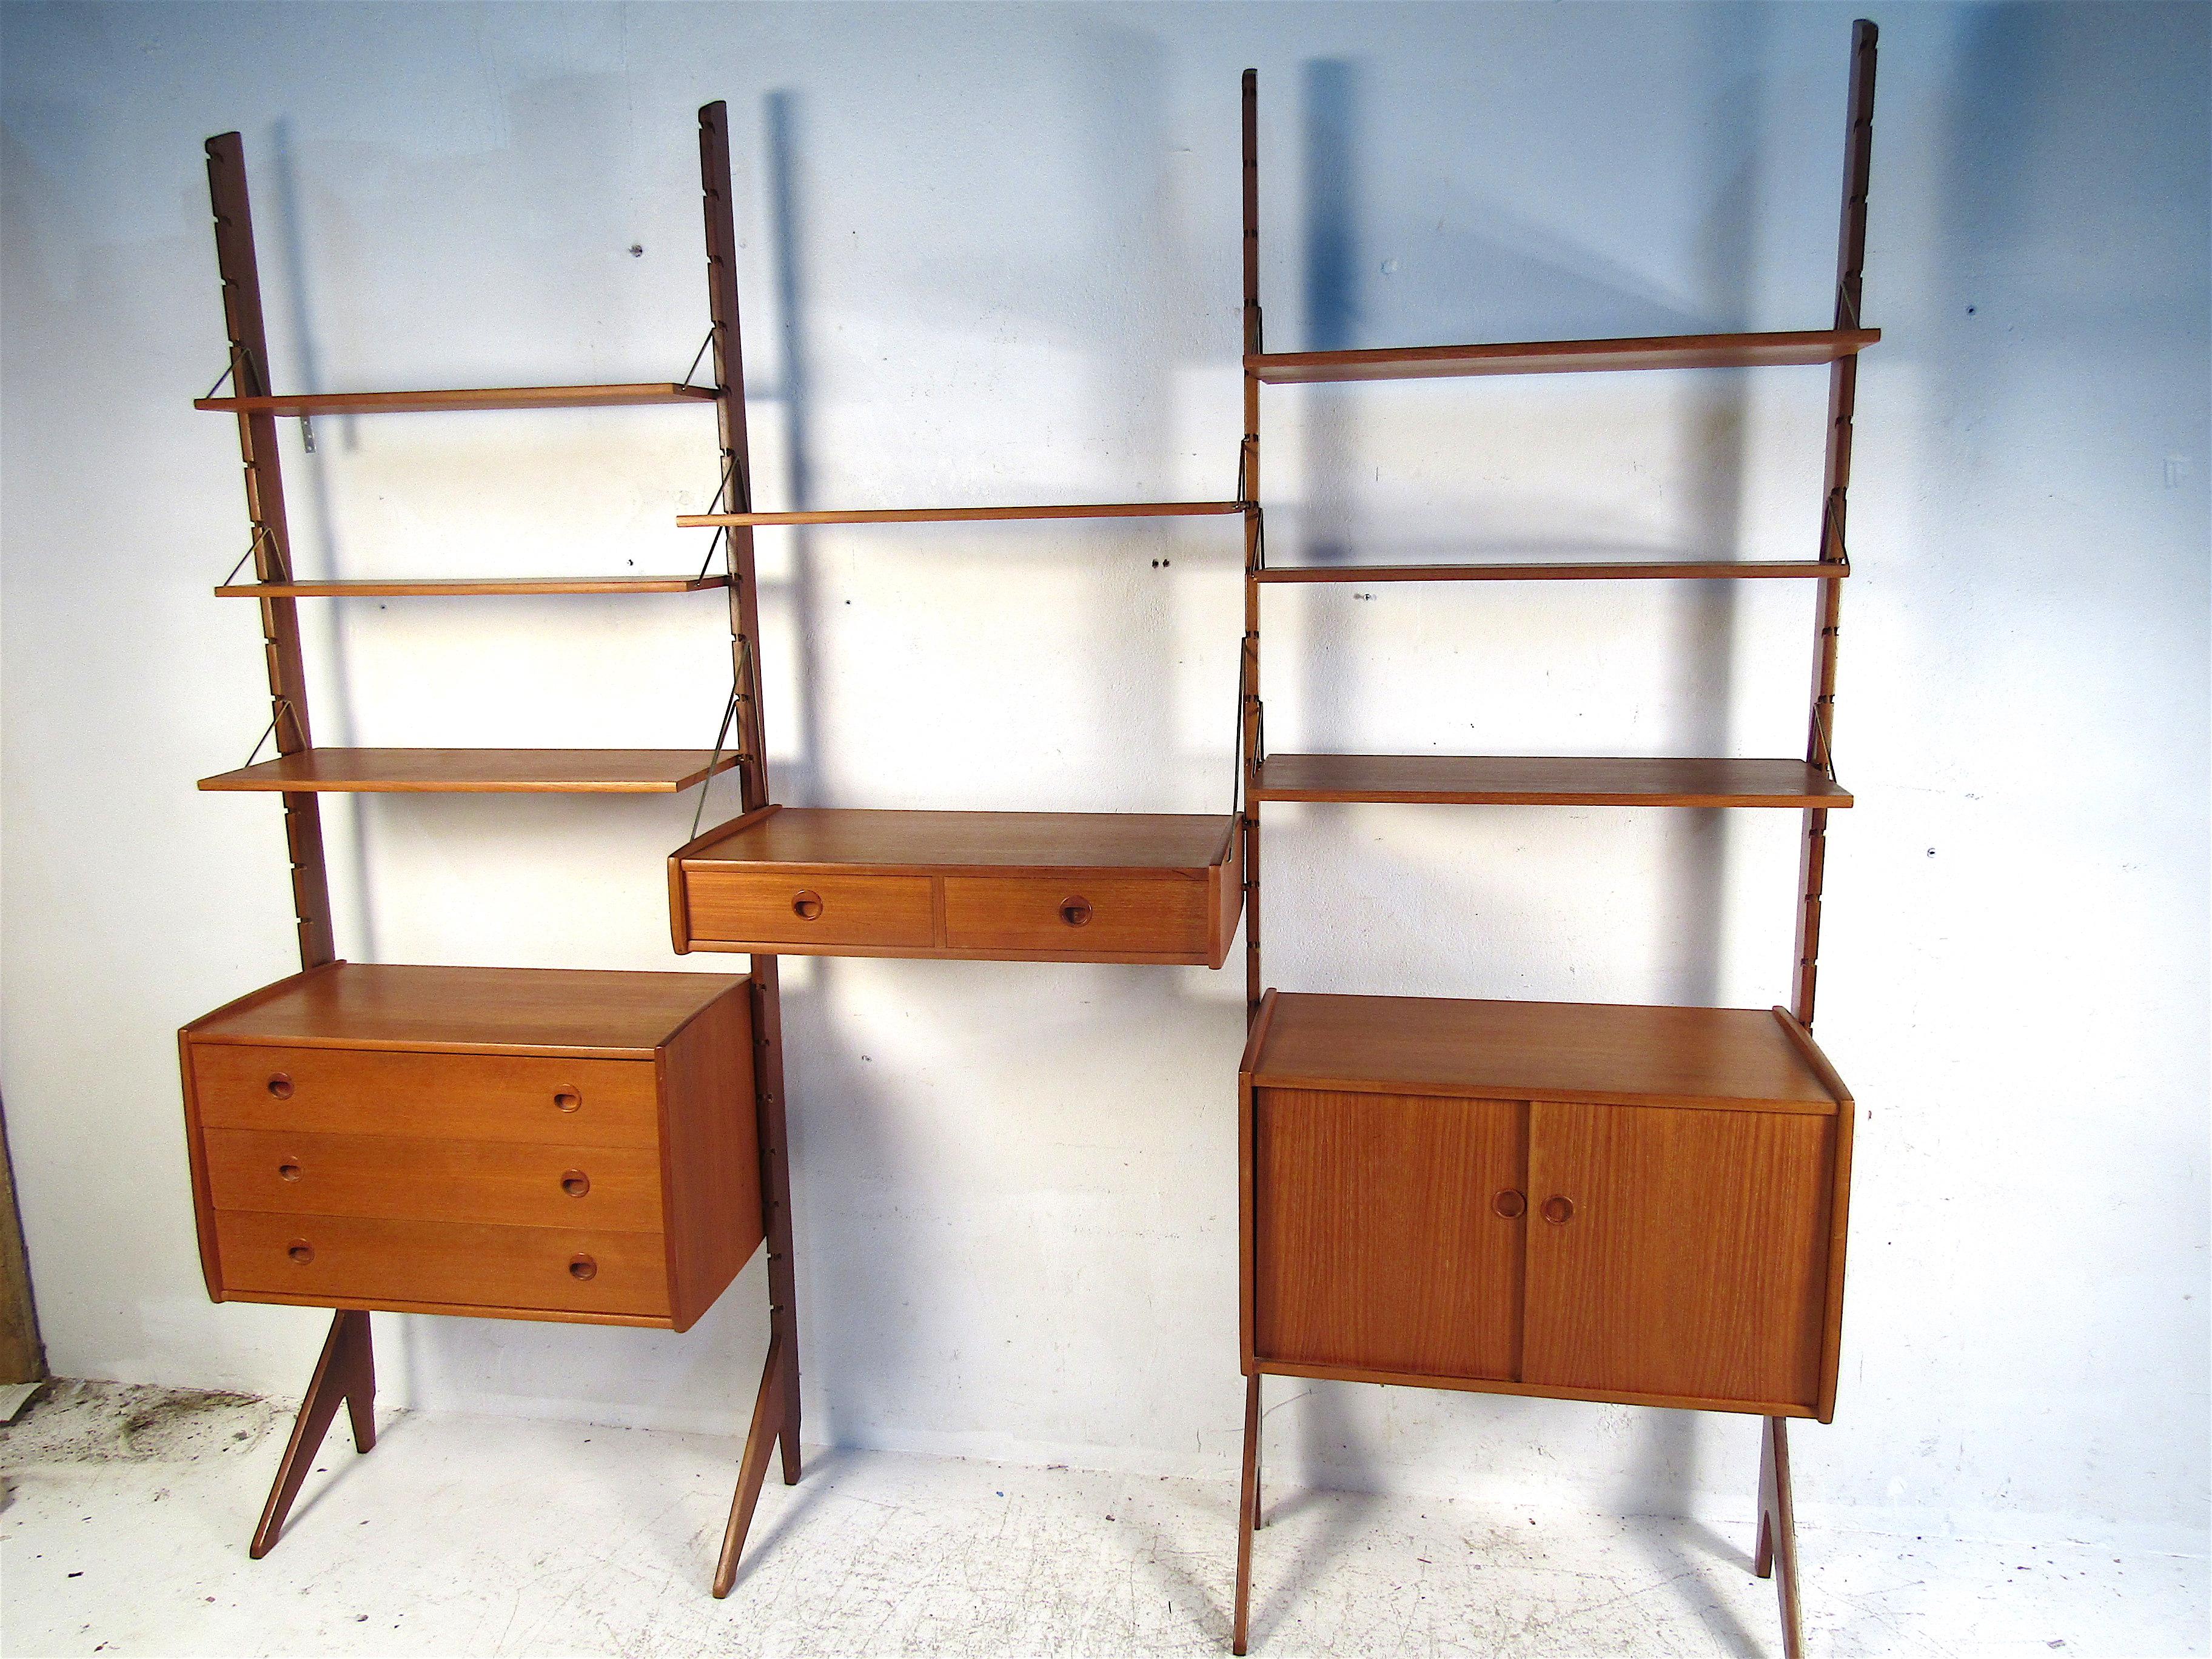 Very nice Danish modern standing wall unit with adjustable components. Assorted cases and shelves provide ample storage/display space and can be set up to your liking. Please confirm item location with dealer (NJ or NY).